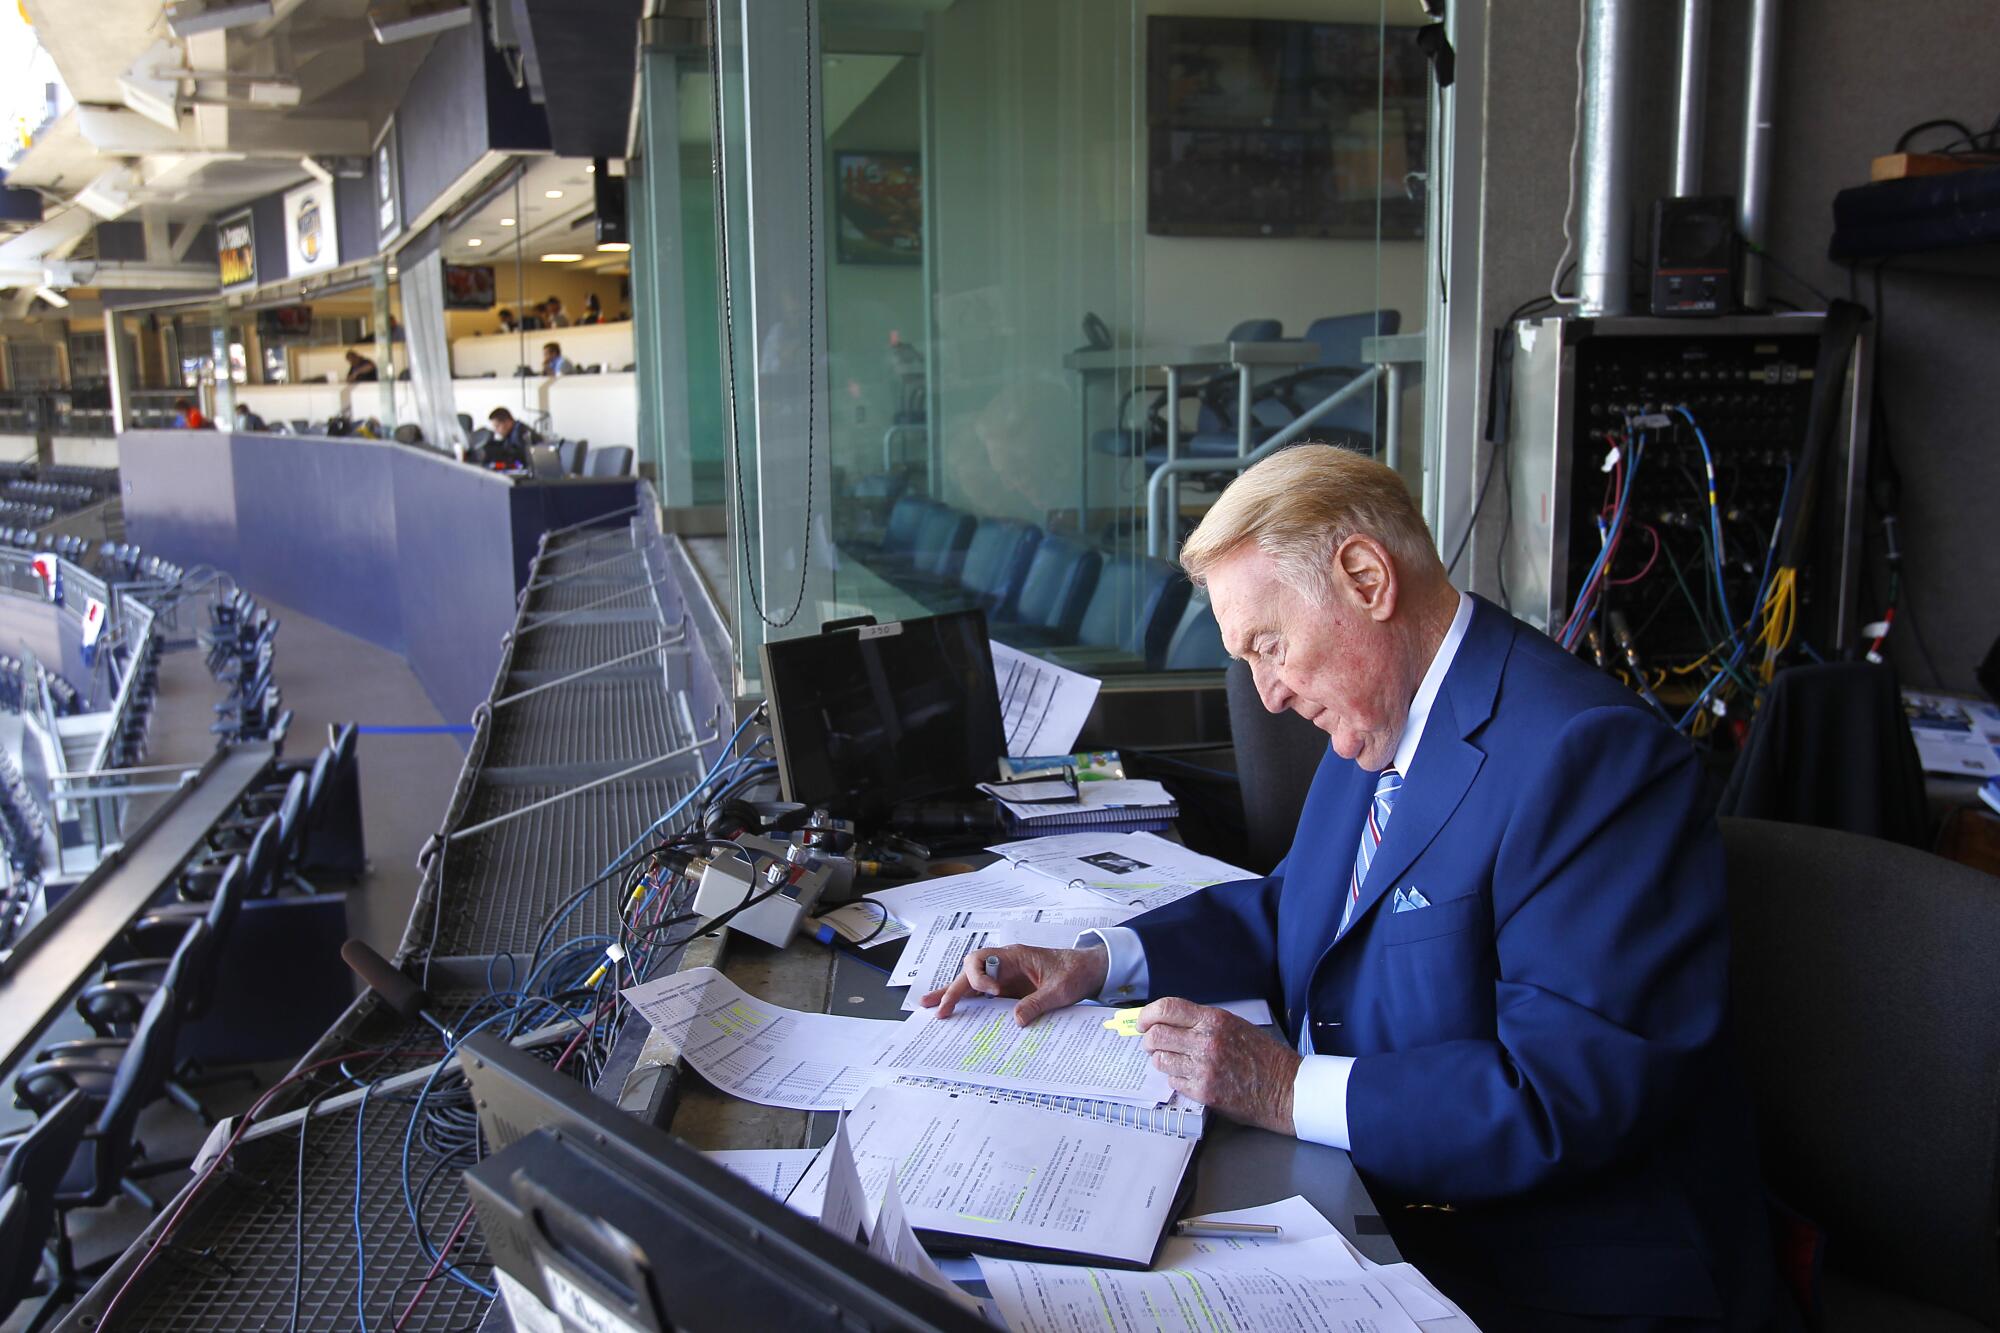 Dodgers announcer Vin Scully looks over his notes in the announcer's booth before a game.